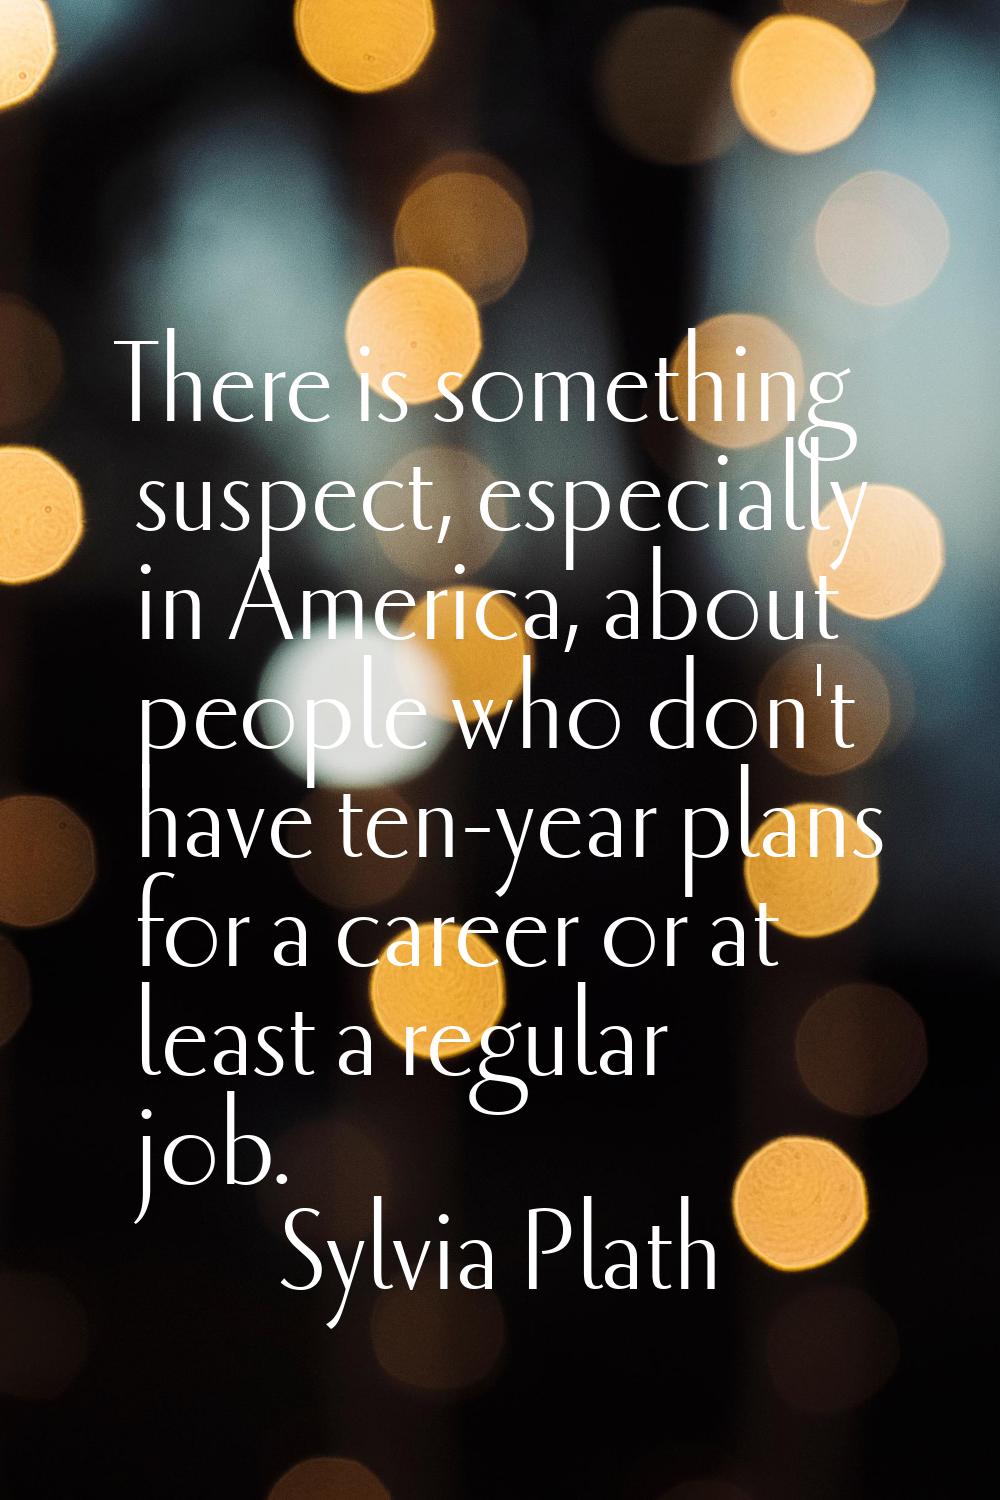 There is something suspect, especially in America, about people who don't have ten-year plans for a